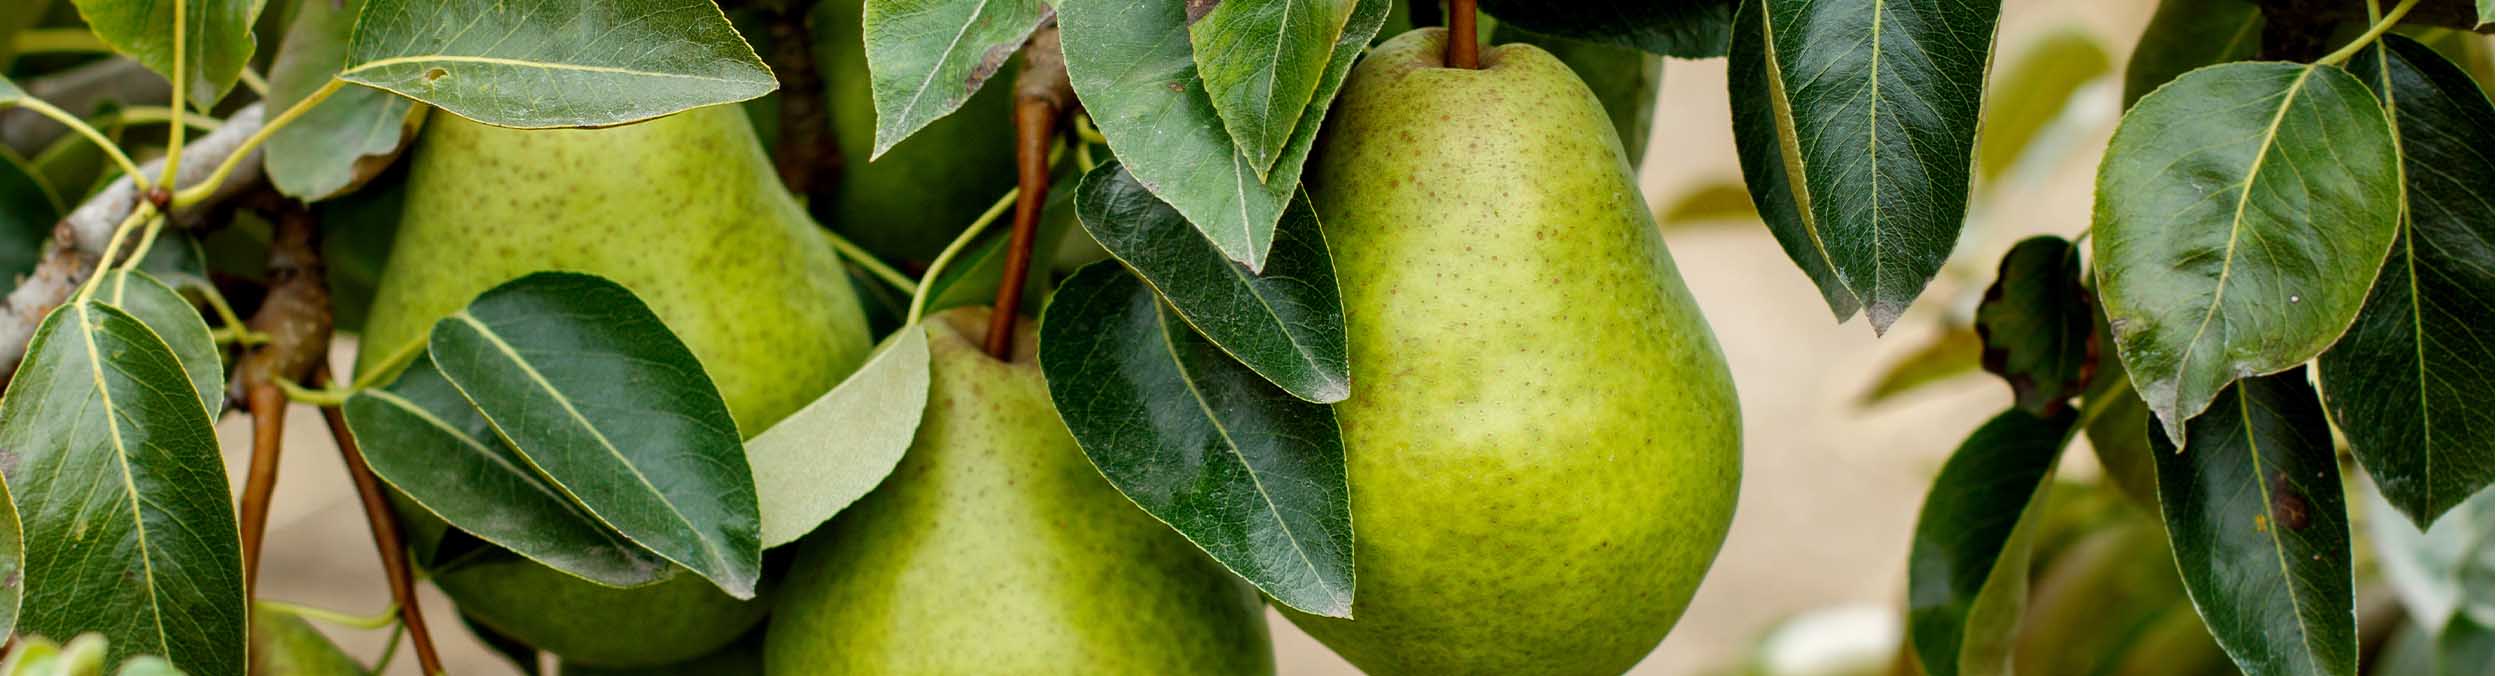 Pear fruit hanging from tree